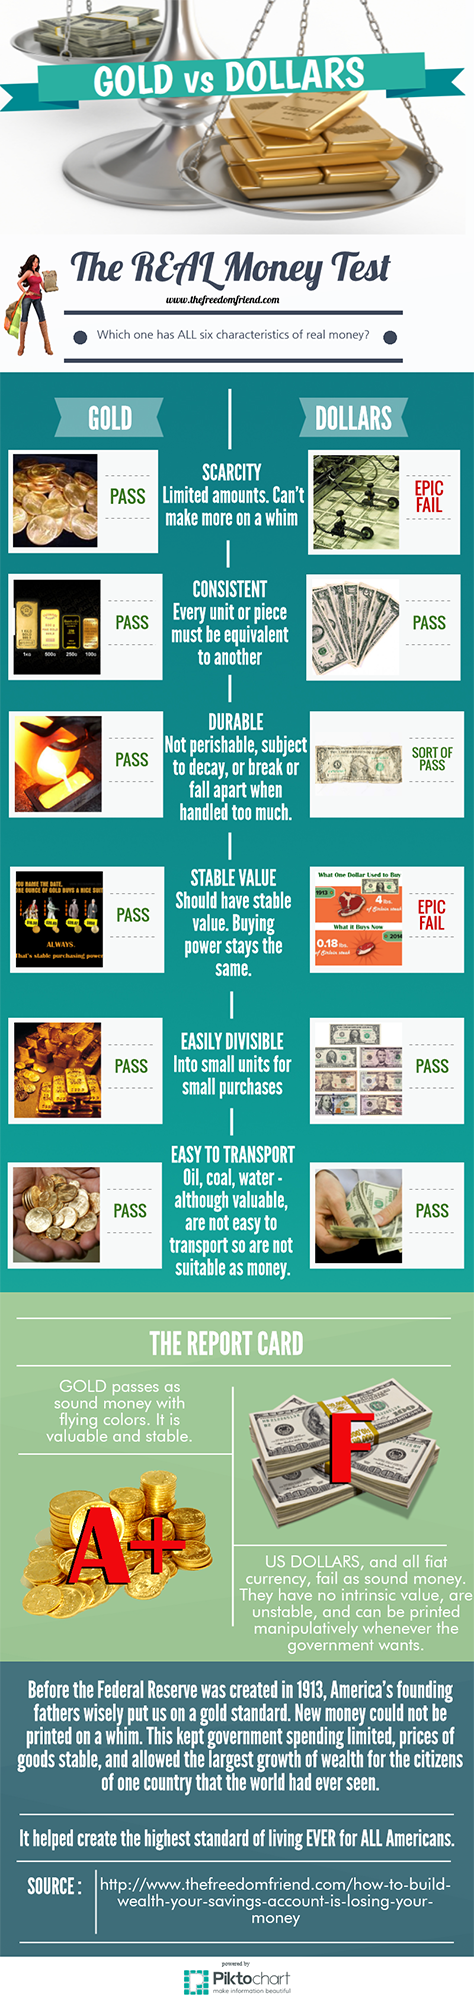 If you like this infographic and found it helpful in understanding money, please share it with your friends and family!